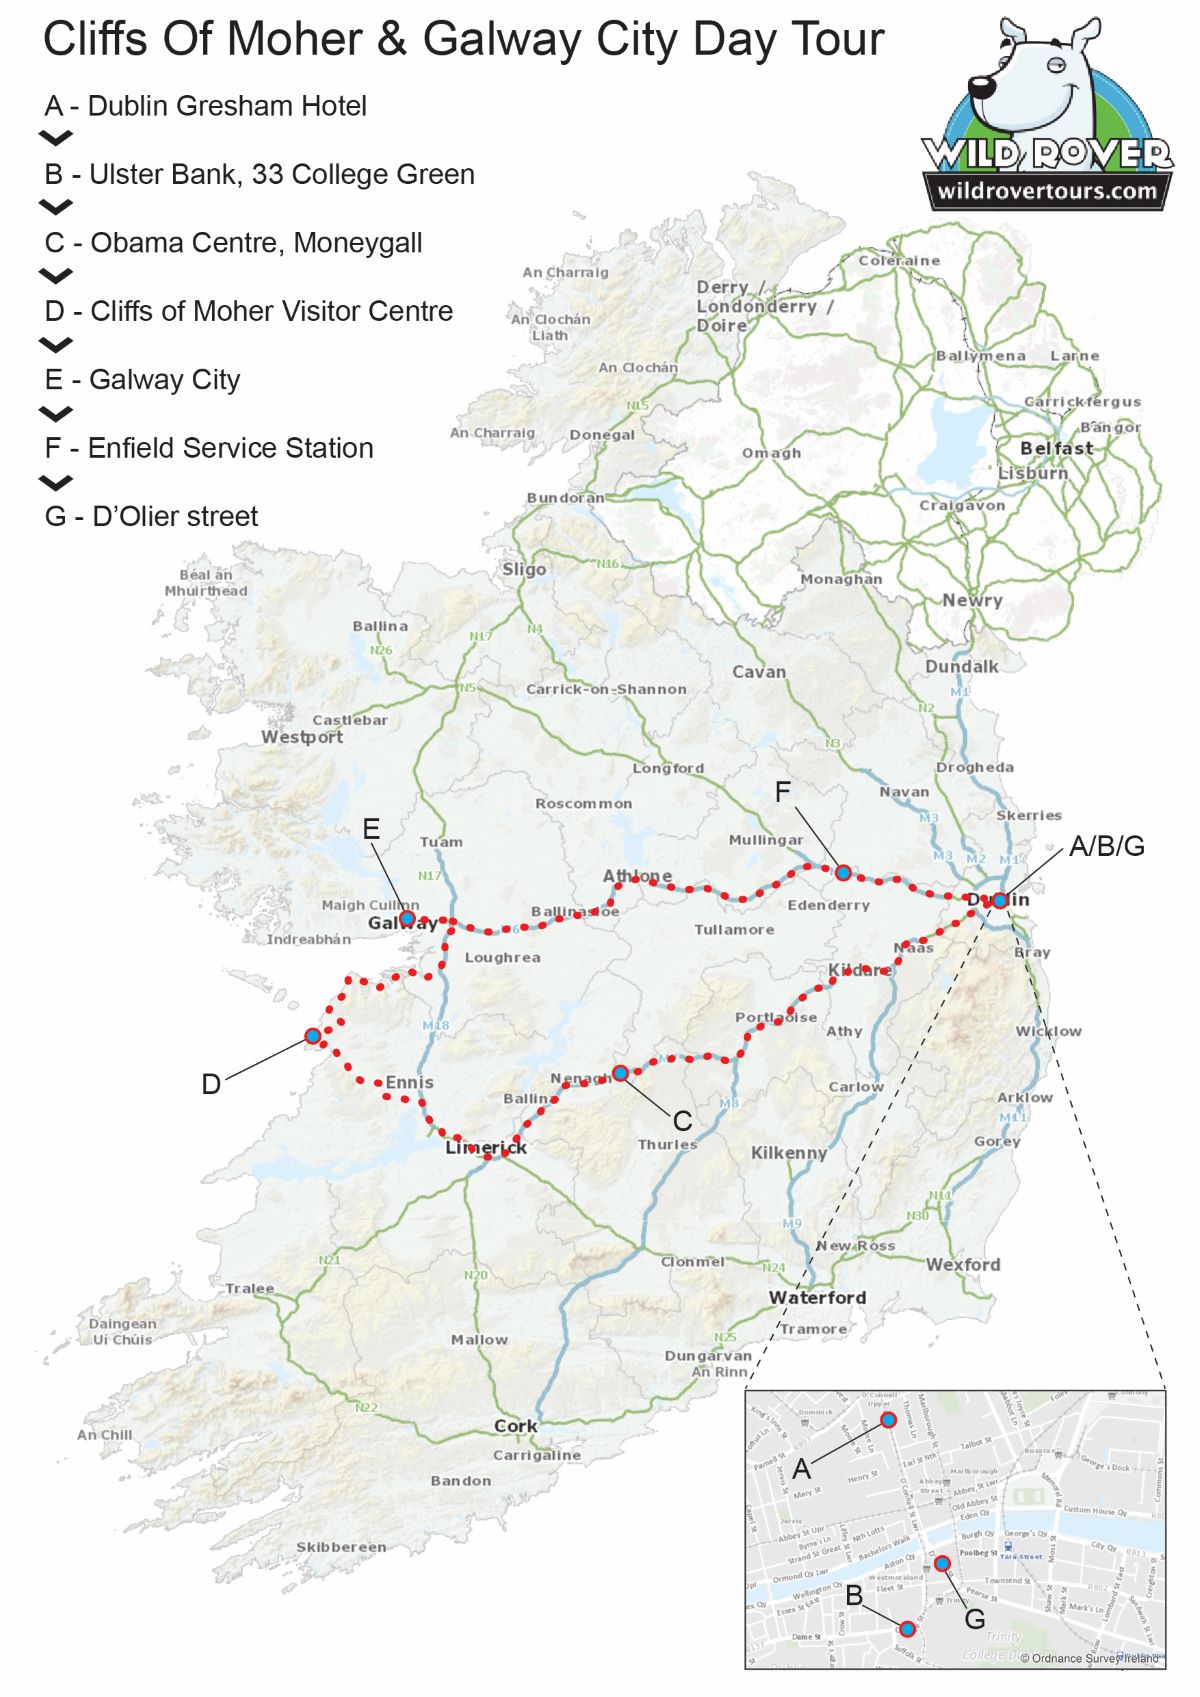 Cliffs of Moher and Galway day trip route map